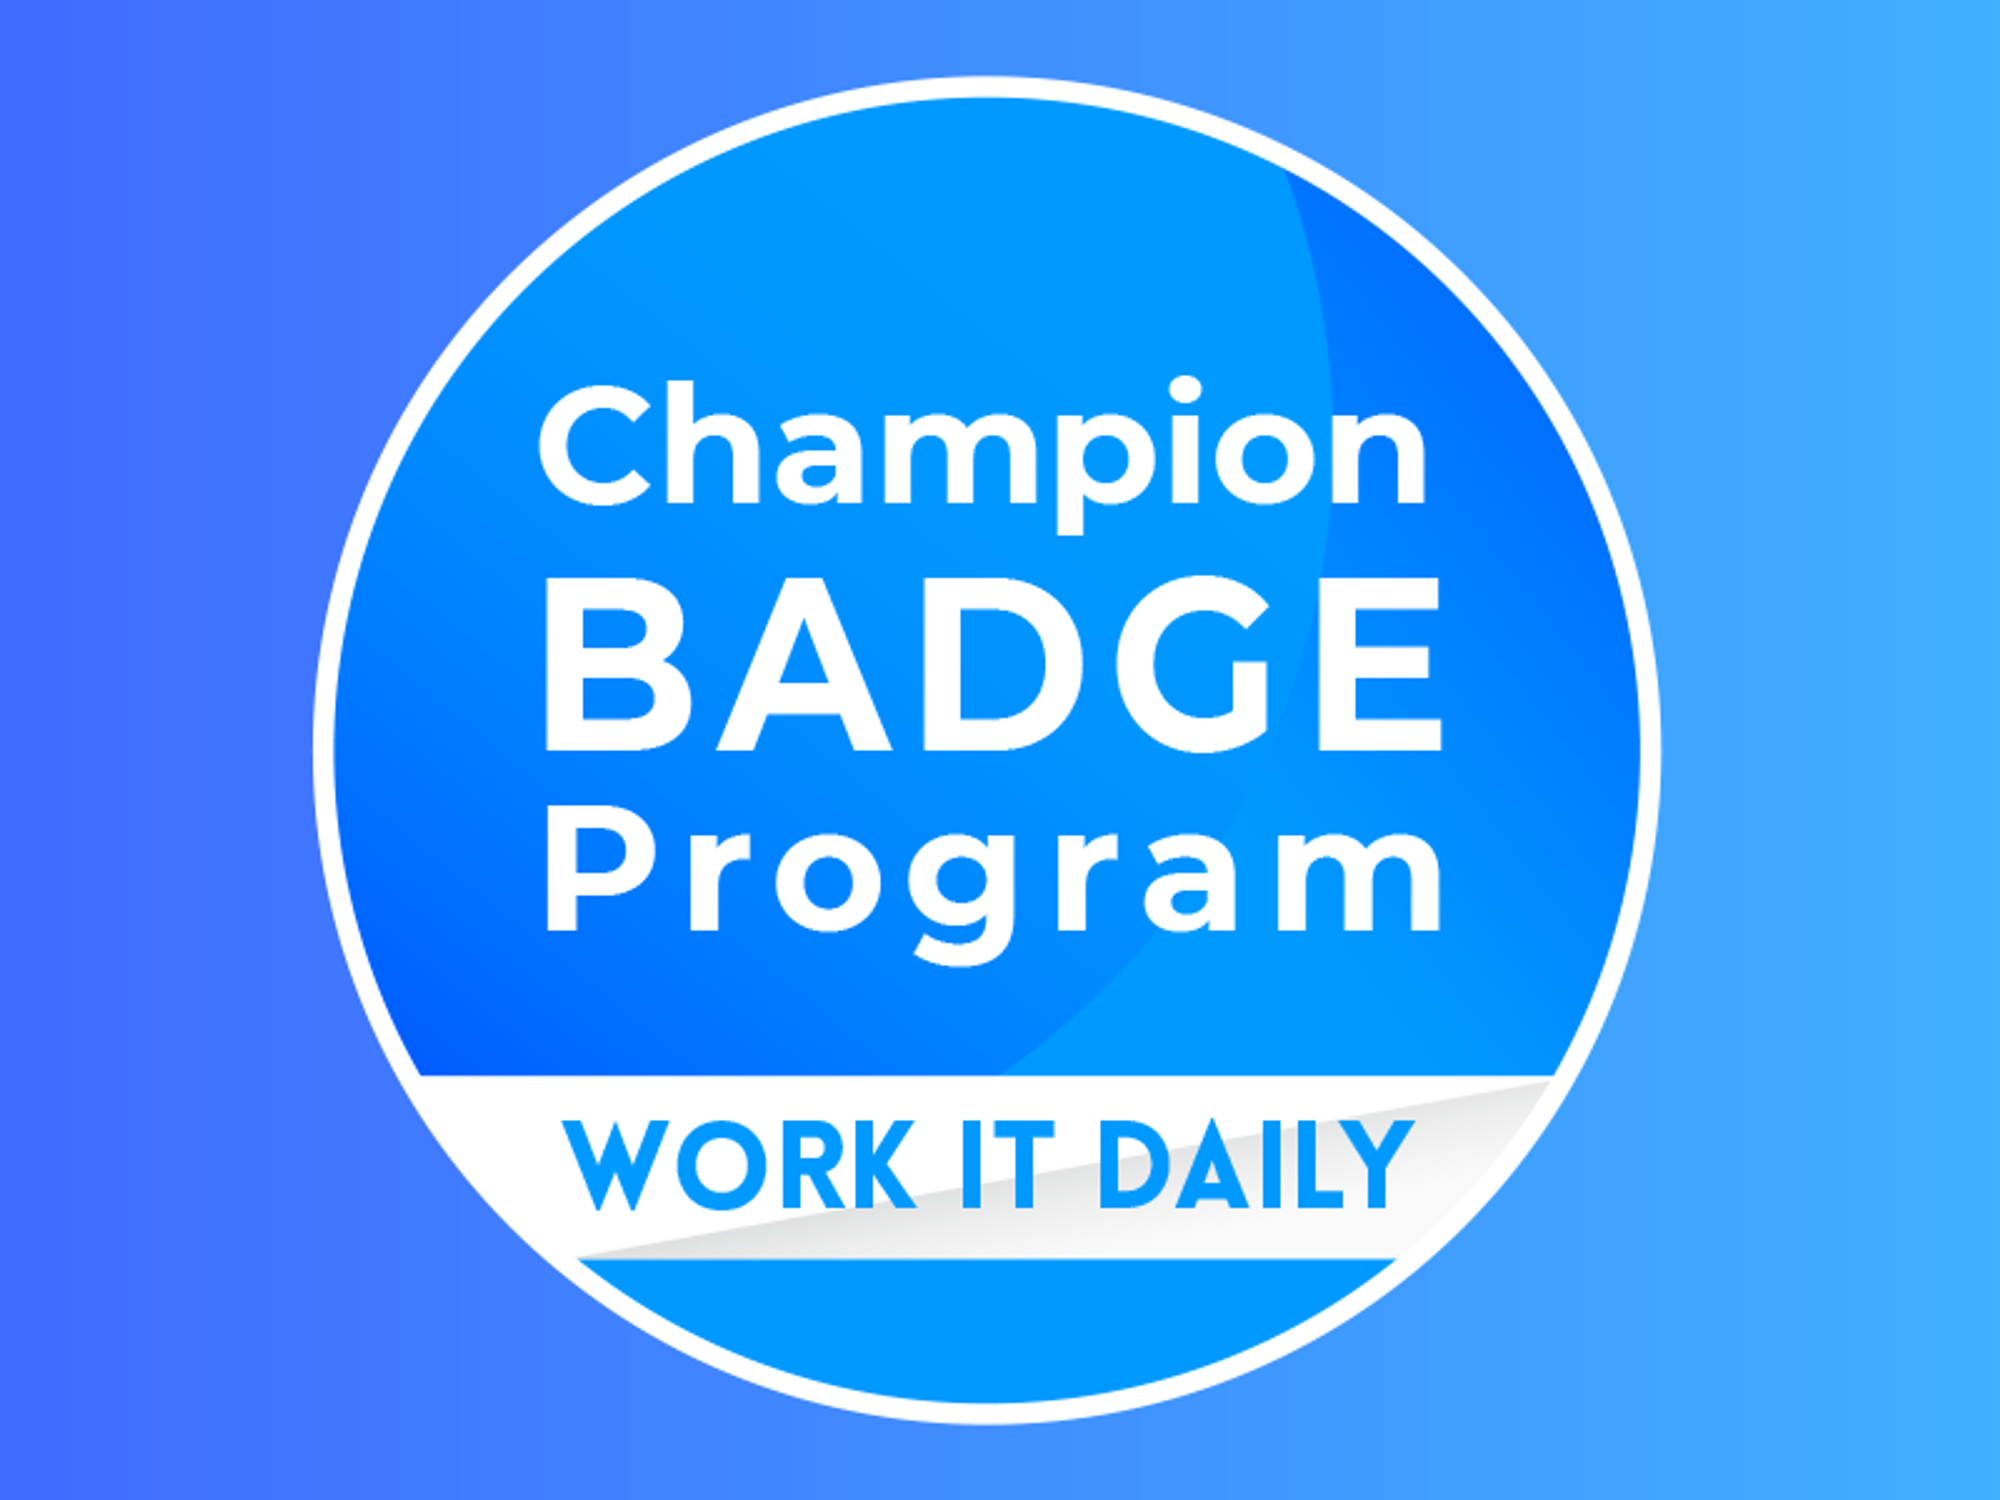 Work It Daily's Champion Badge Program recognizes businesses that go above and beyond for employees